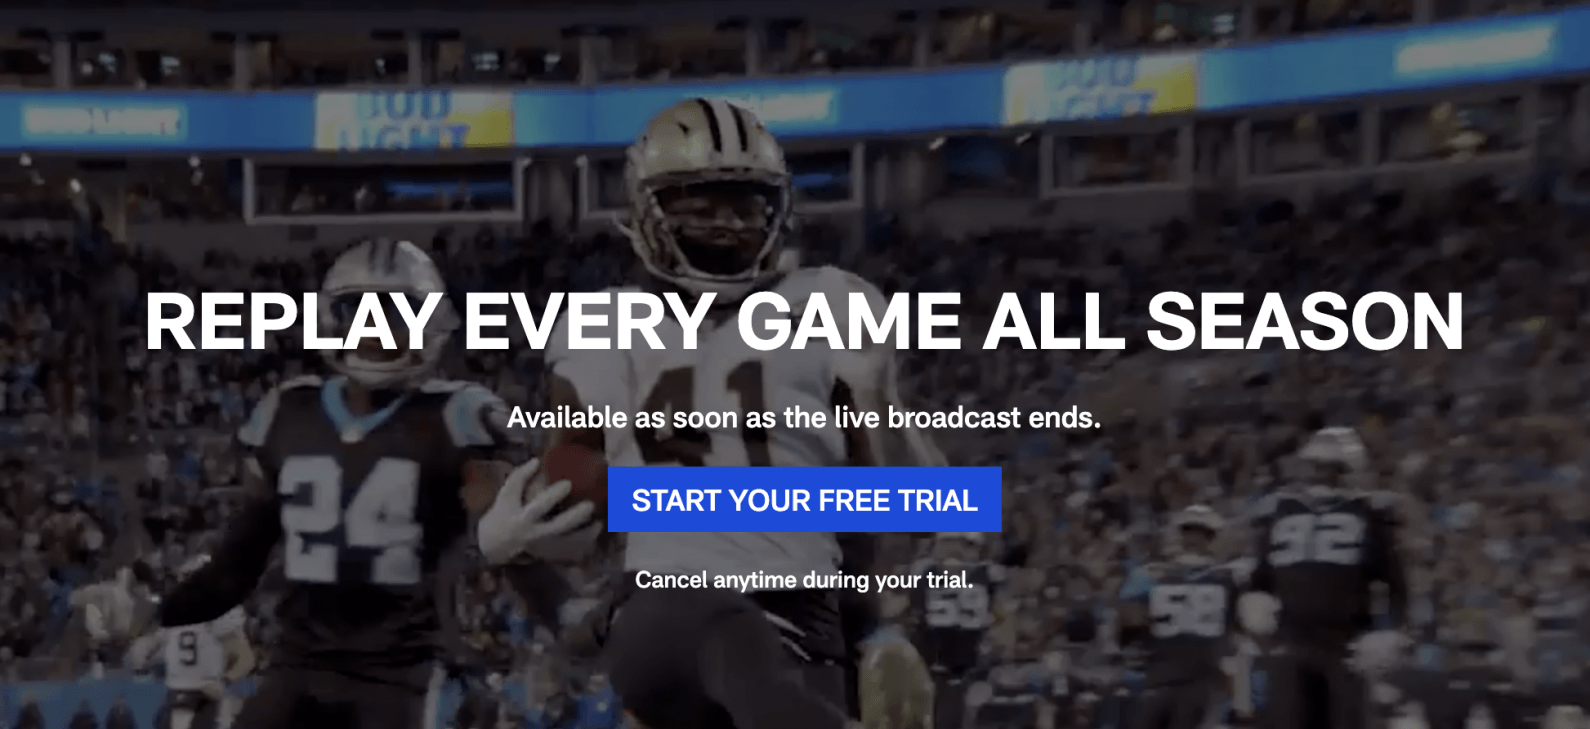 how to watch nfl game pass on xbox one